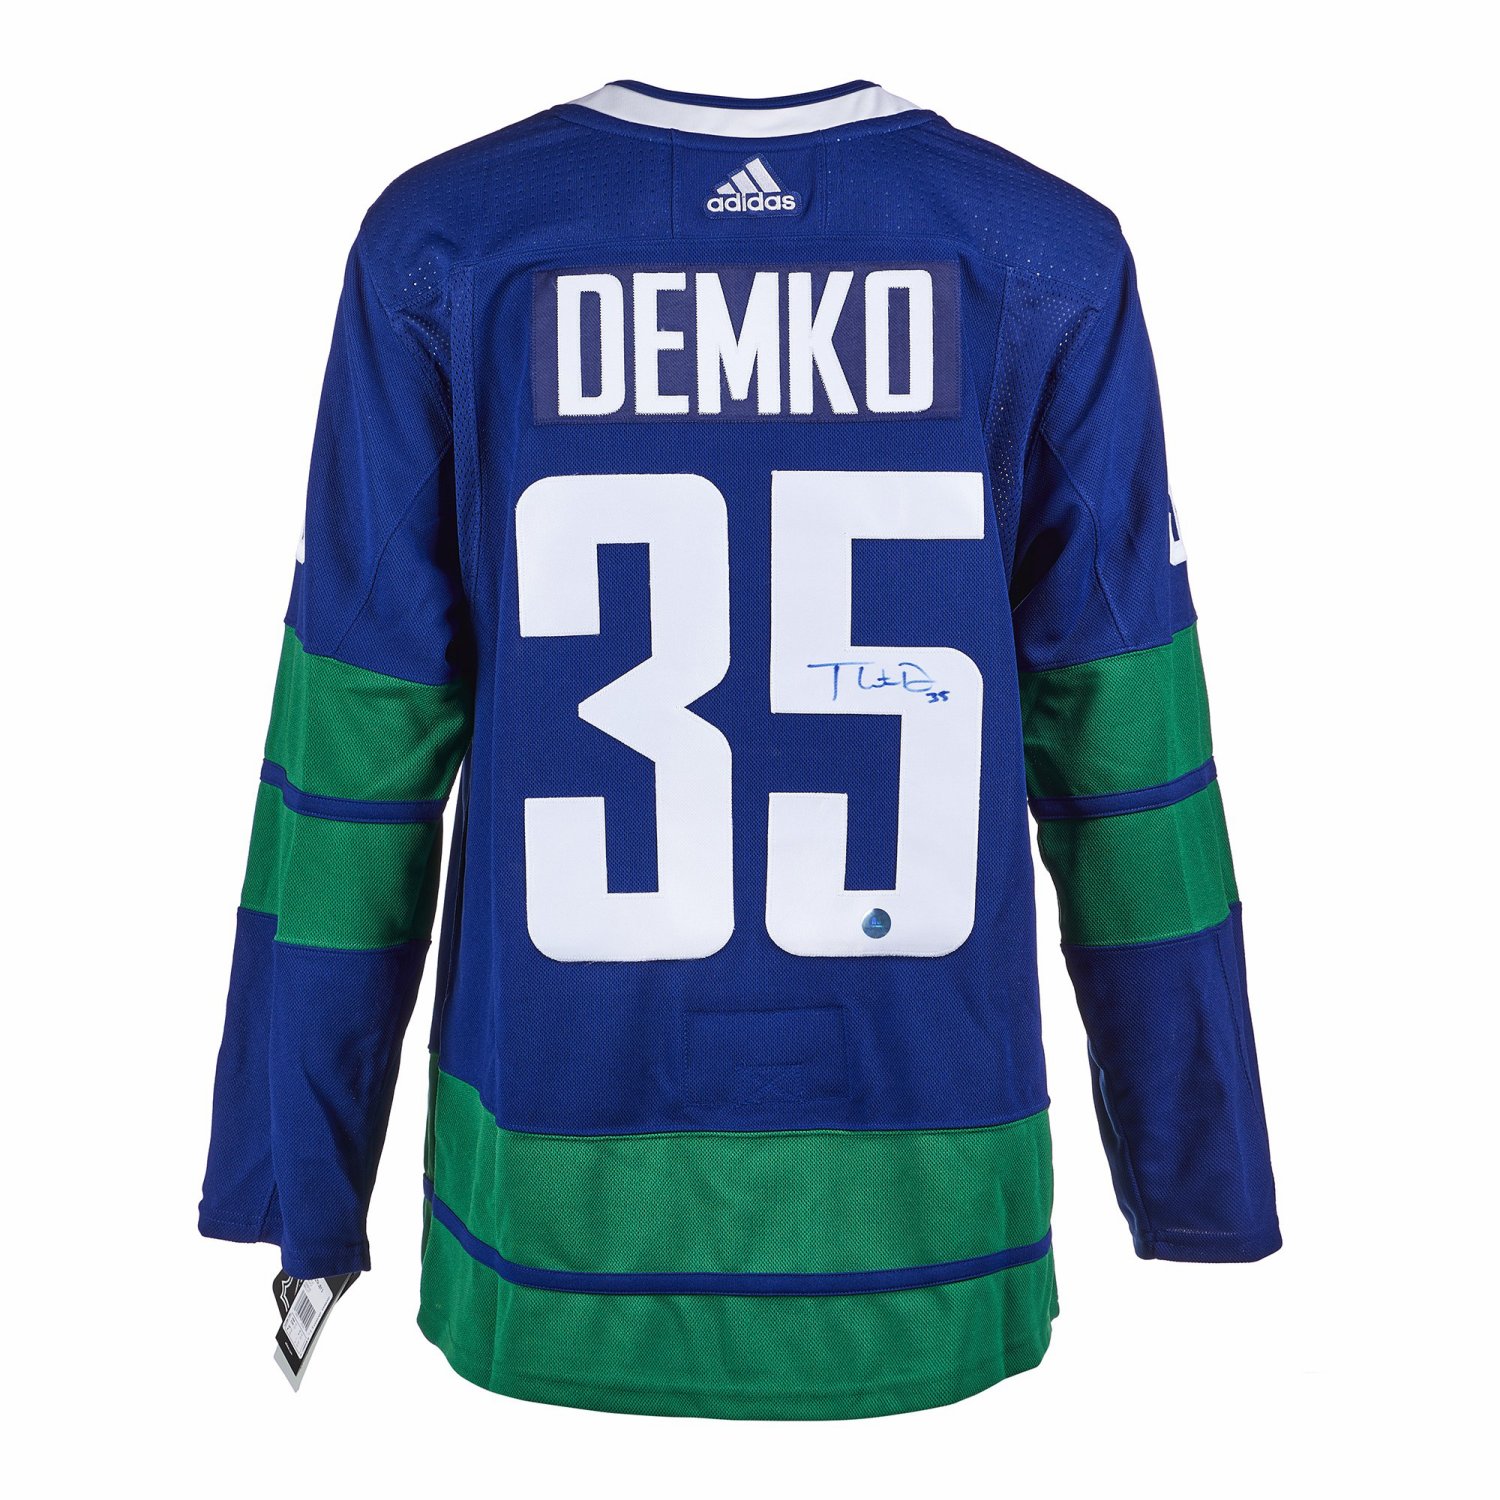 Thatcher Demko Vancouver Canucks Autographed White Adidas Authentic Jersey